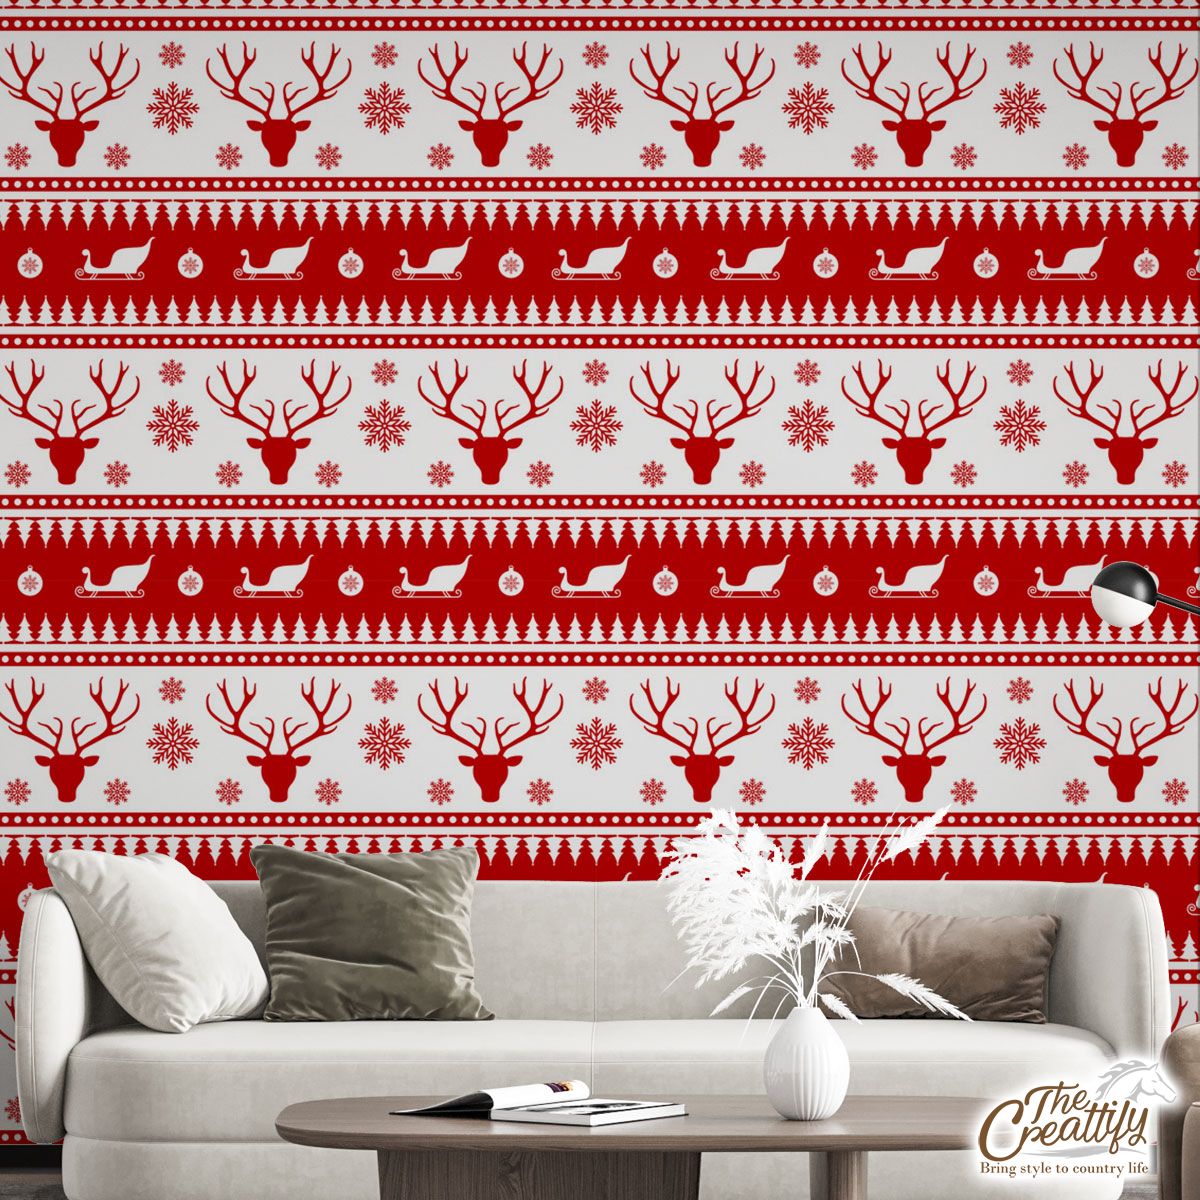 Red And White Reindeer, Santa Sleigh, Christmas Balls On The Snowflake Background Wall Mural